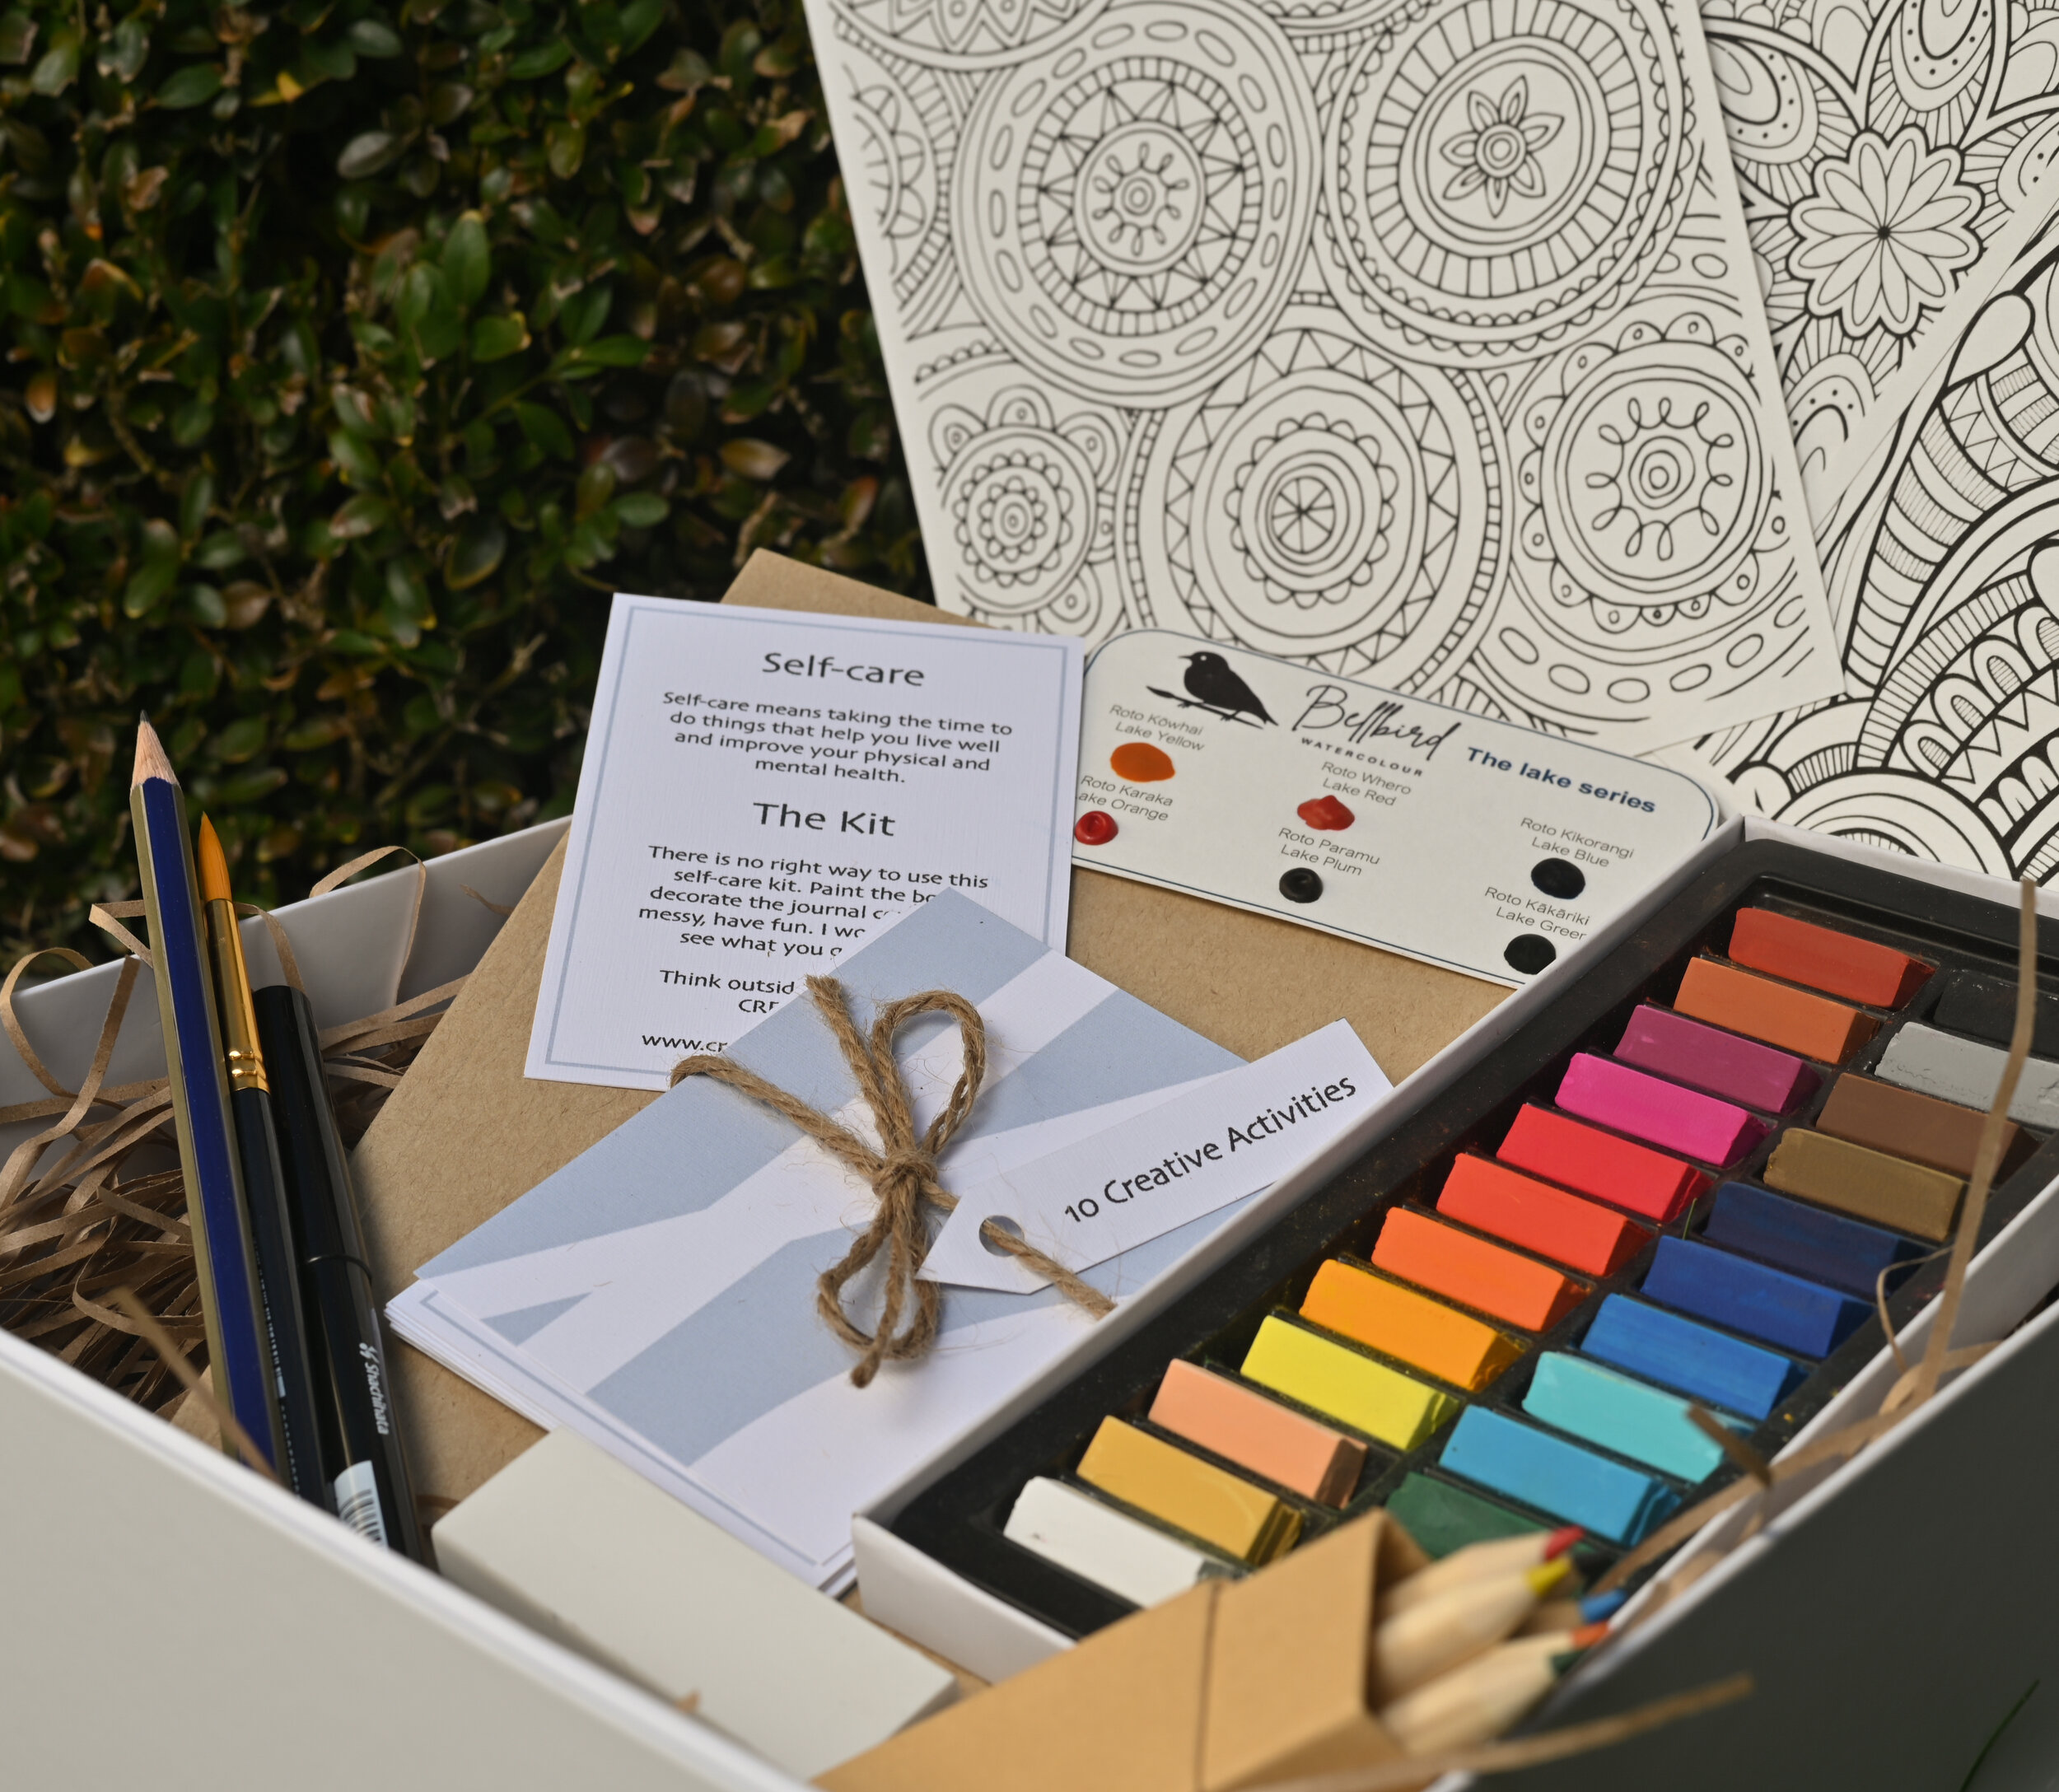 Make An On-The-Go Art Kit for Travel - Creativity in Therapy